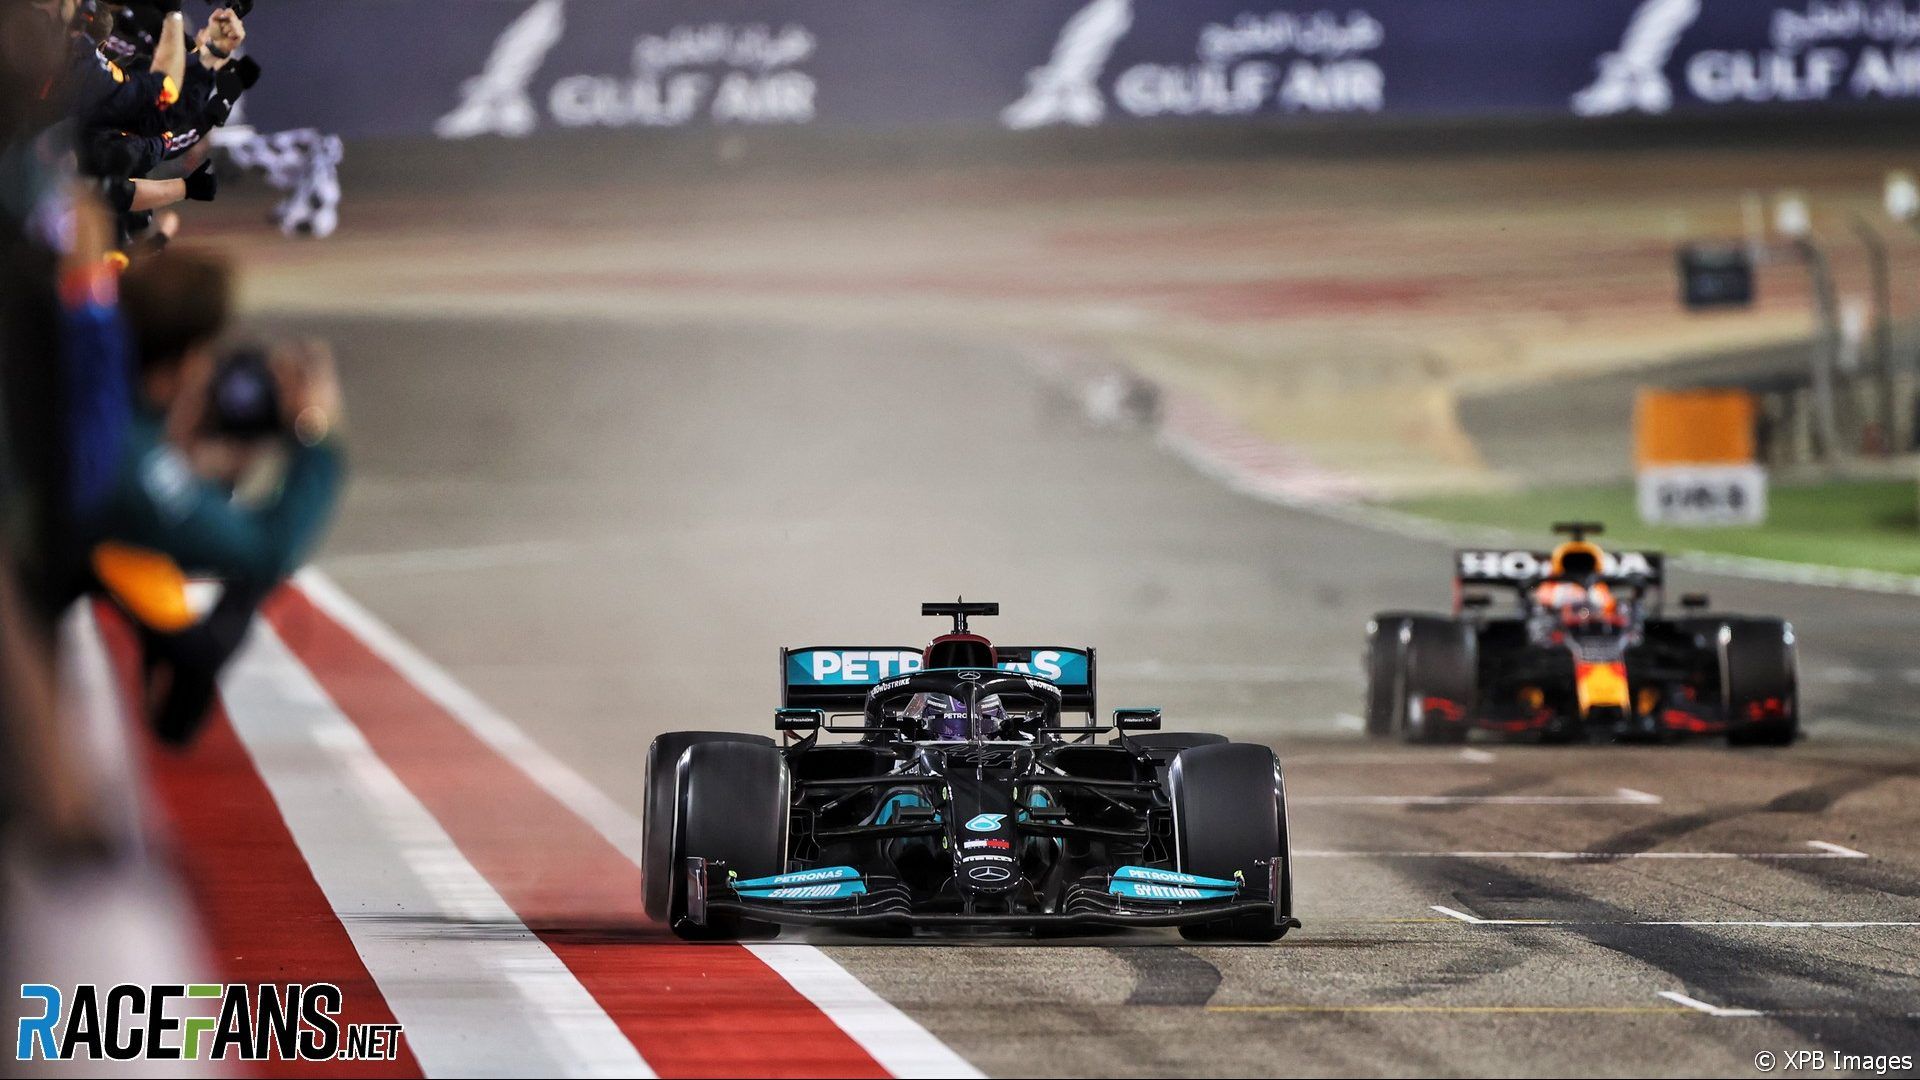 Hamilton Resists Verstappen To Deny Red Bull Victory In Bahrain GP Nail Biter · RaceFans